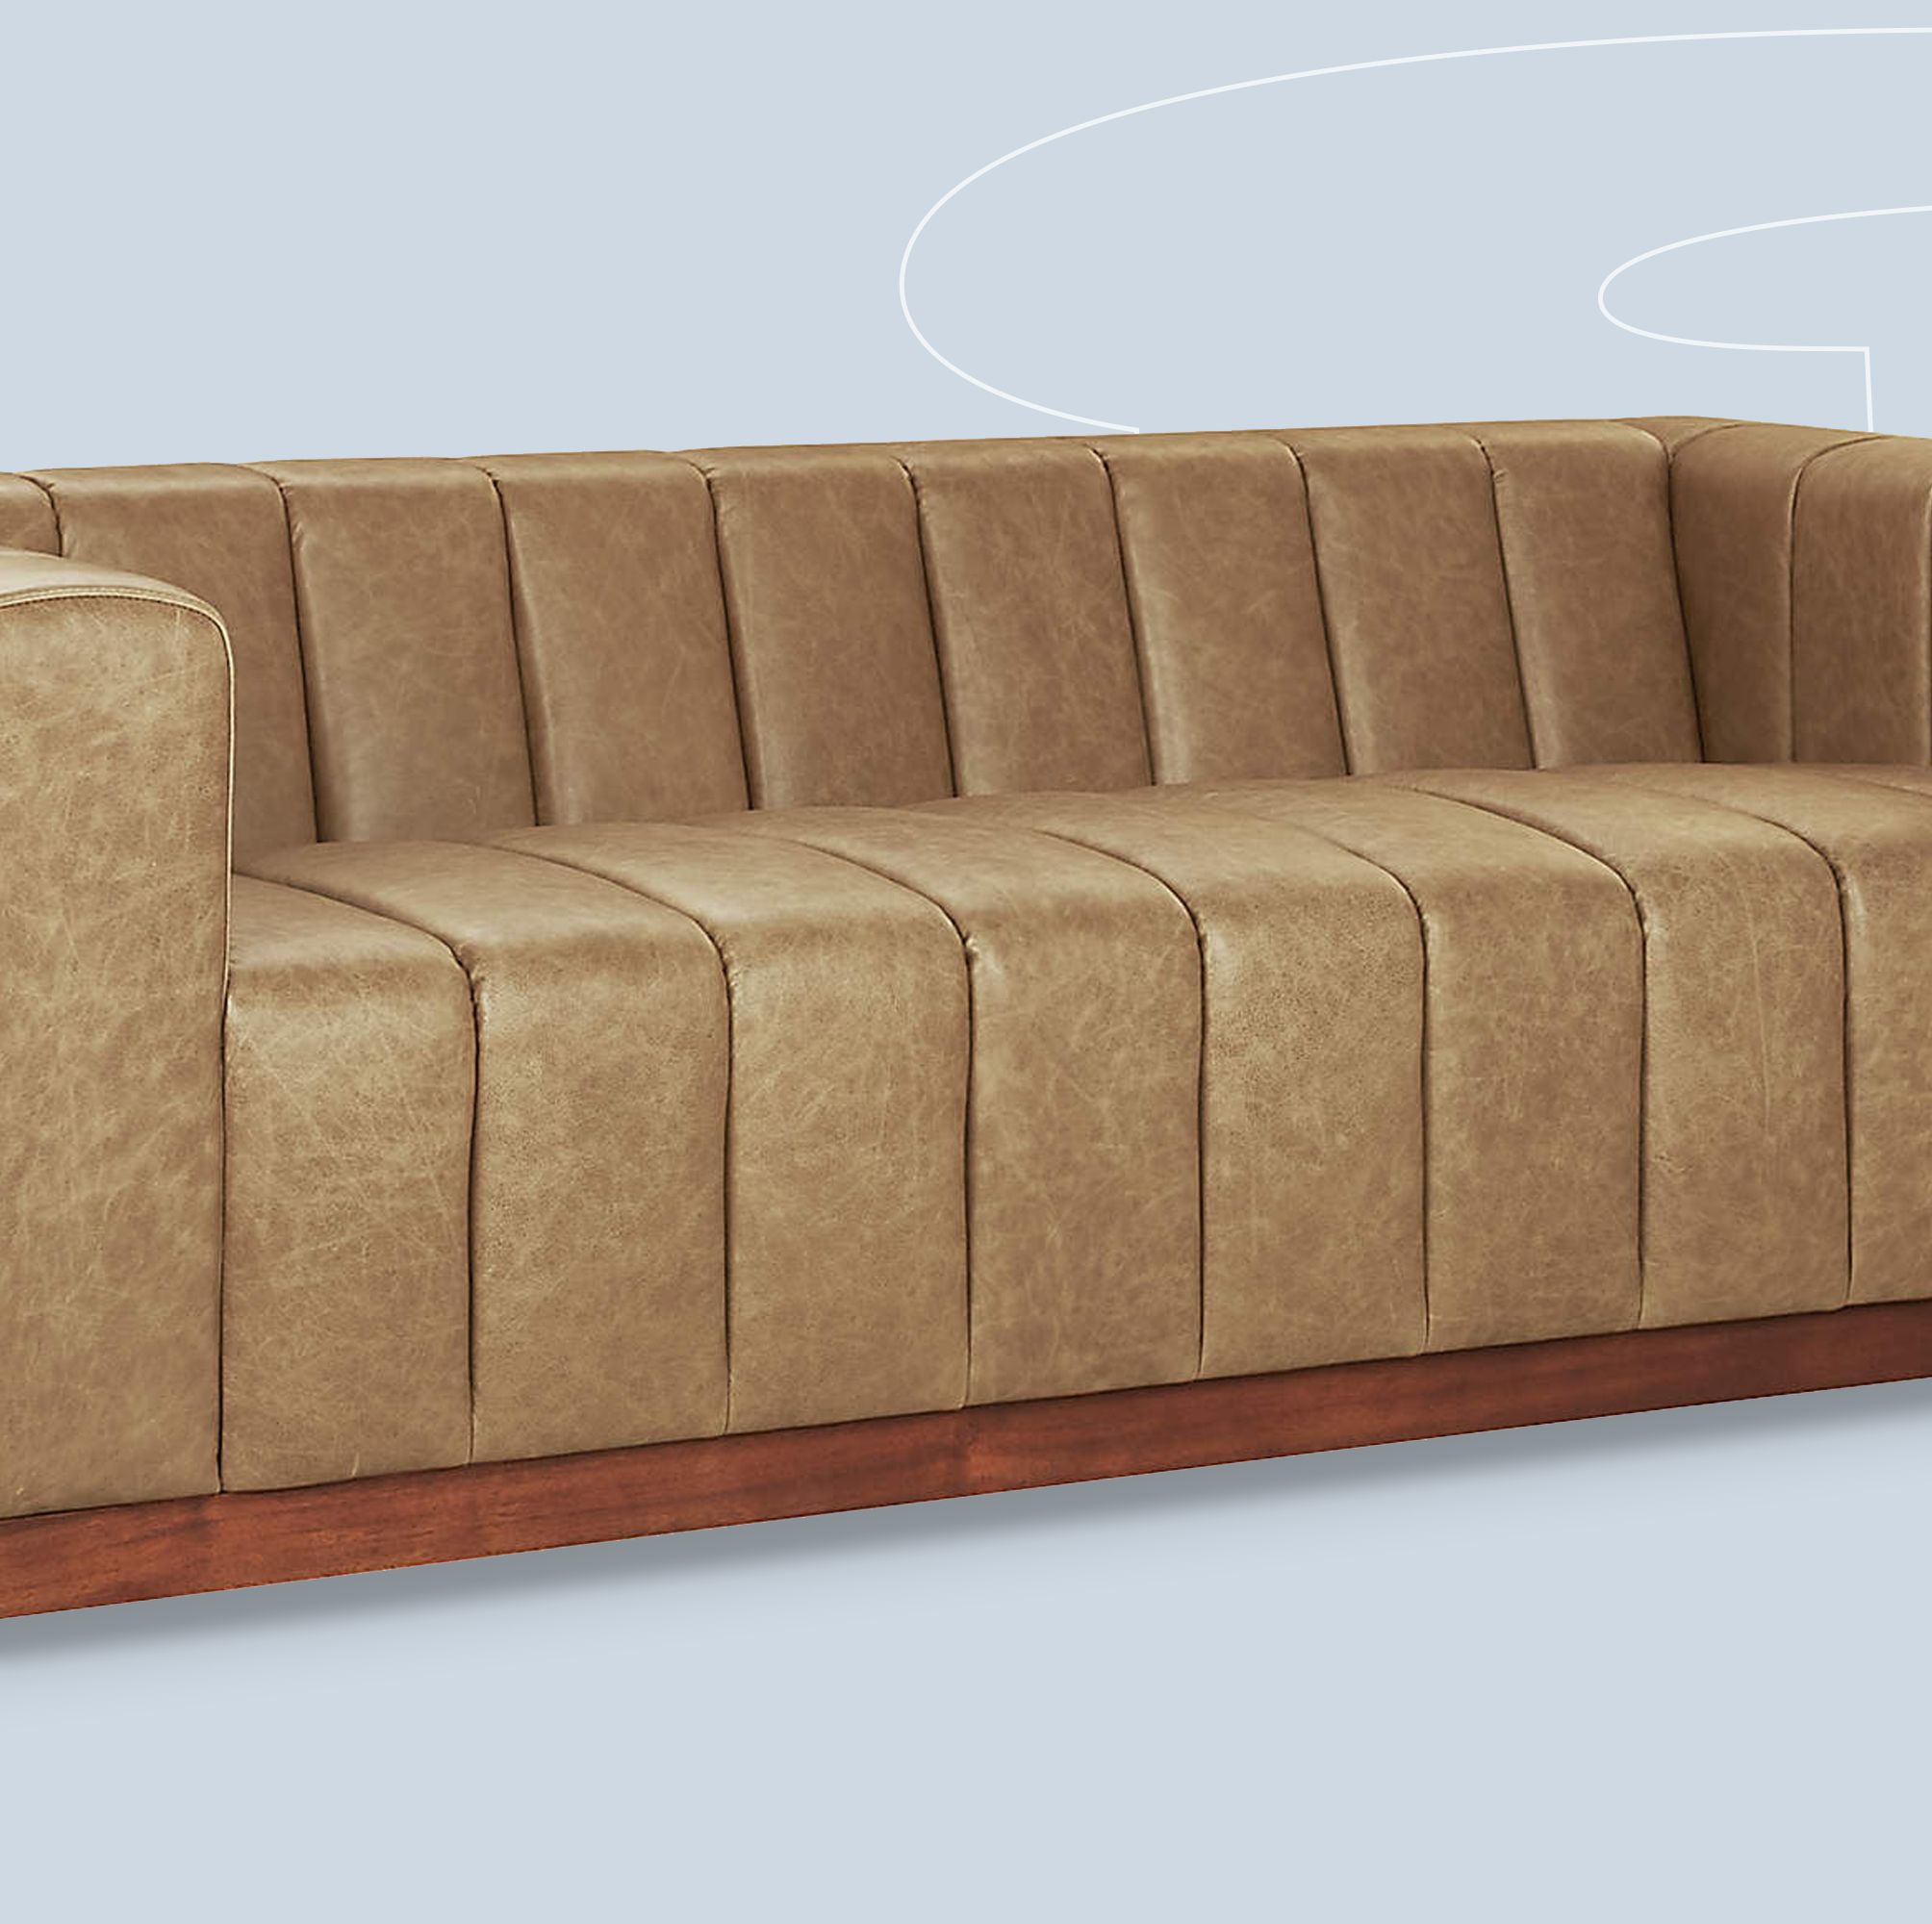 17 Timeless Leather Sofas That Offer Both Comfort and Class